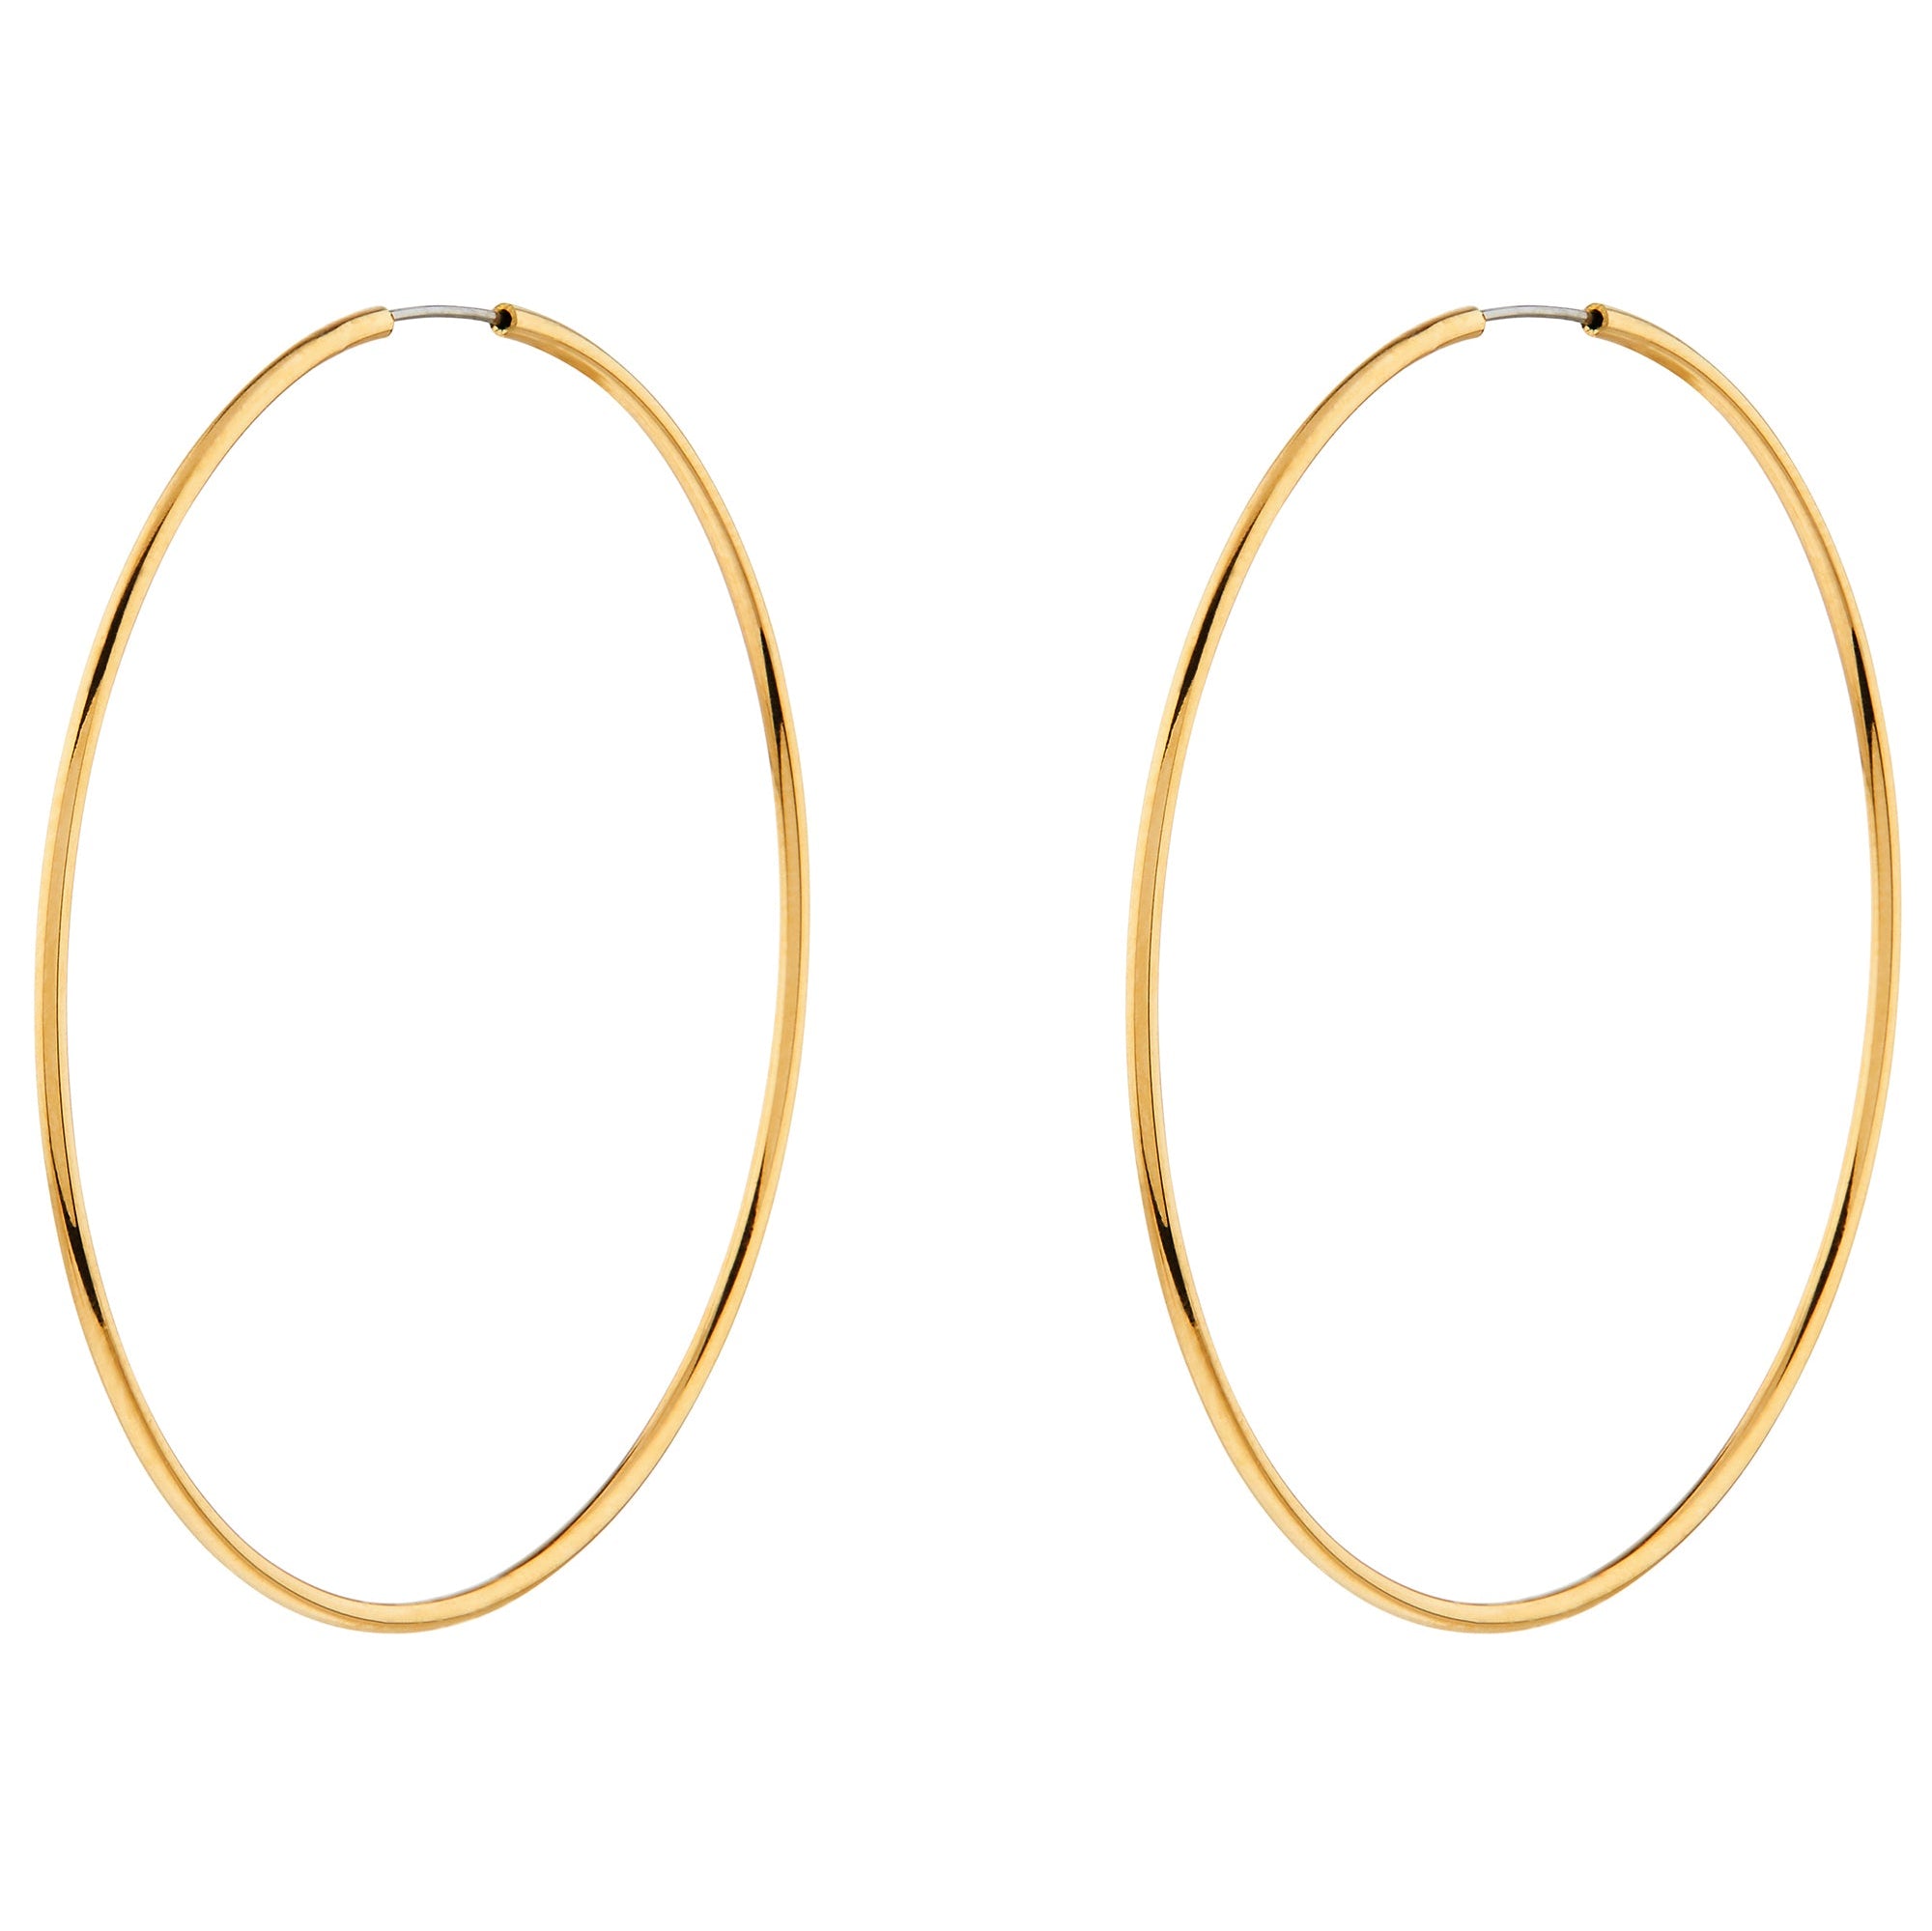 Real Gold Plated Hoop Earrings For Women By Accessorize London